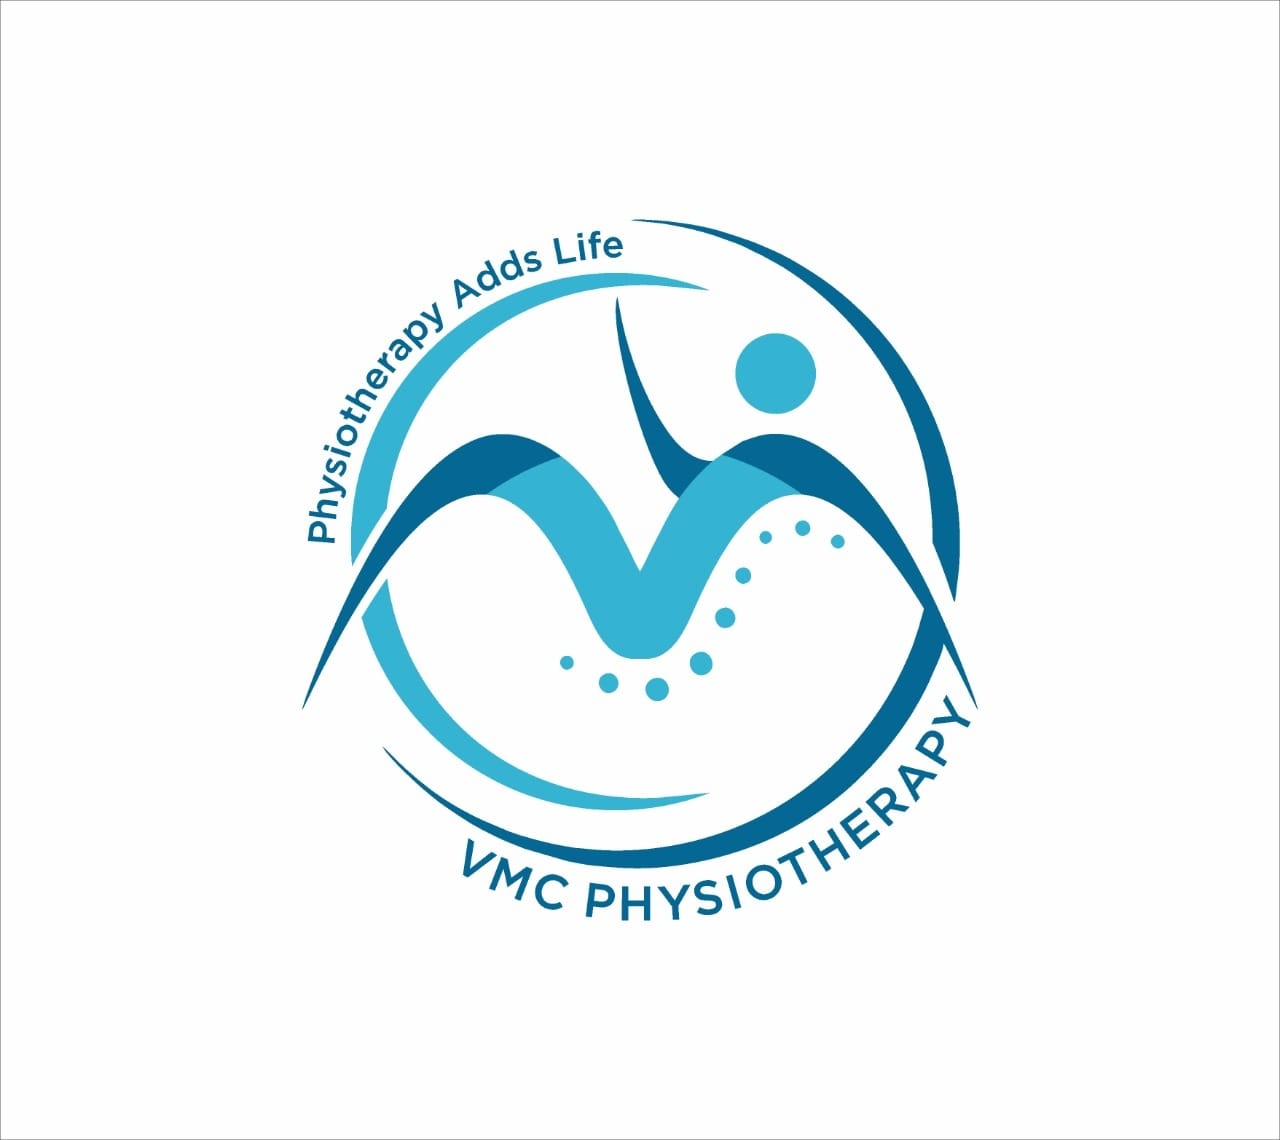 PRP Physio North Lakes | Mobile Physio Brisbane